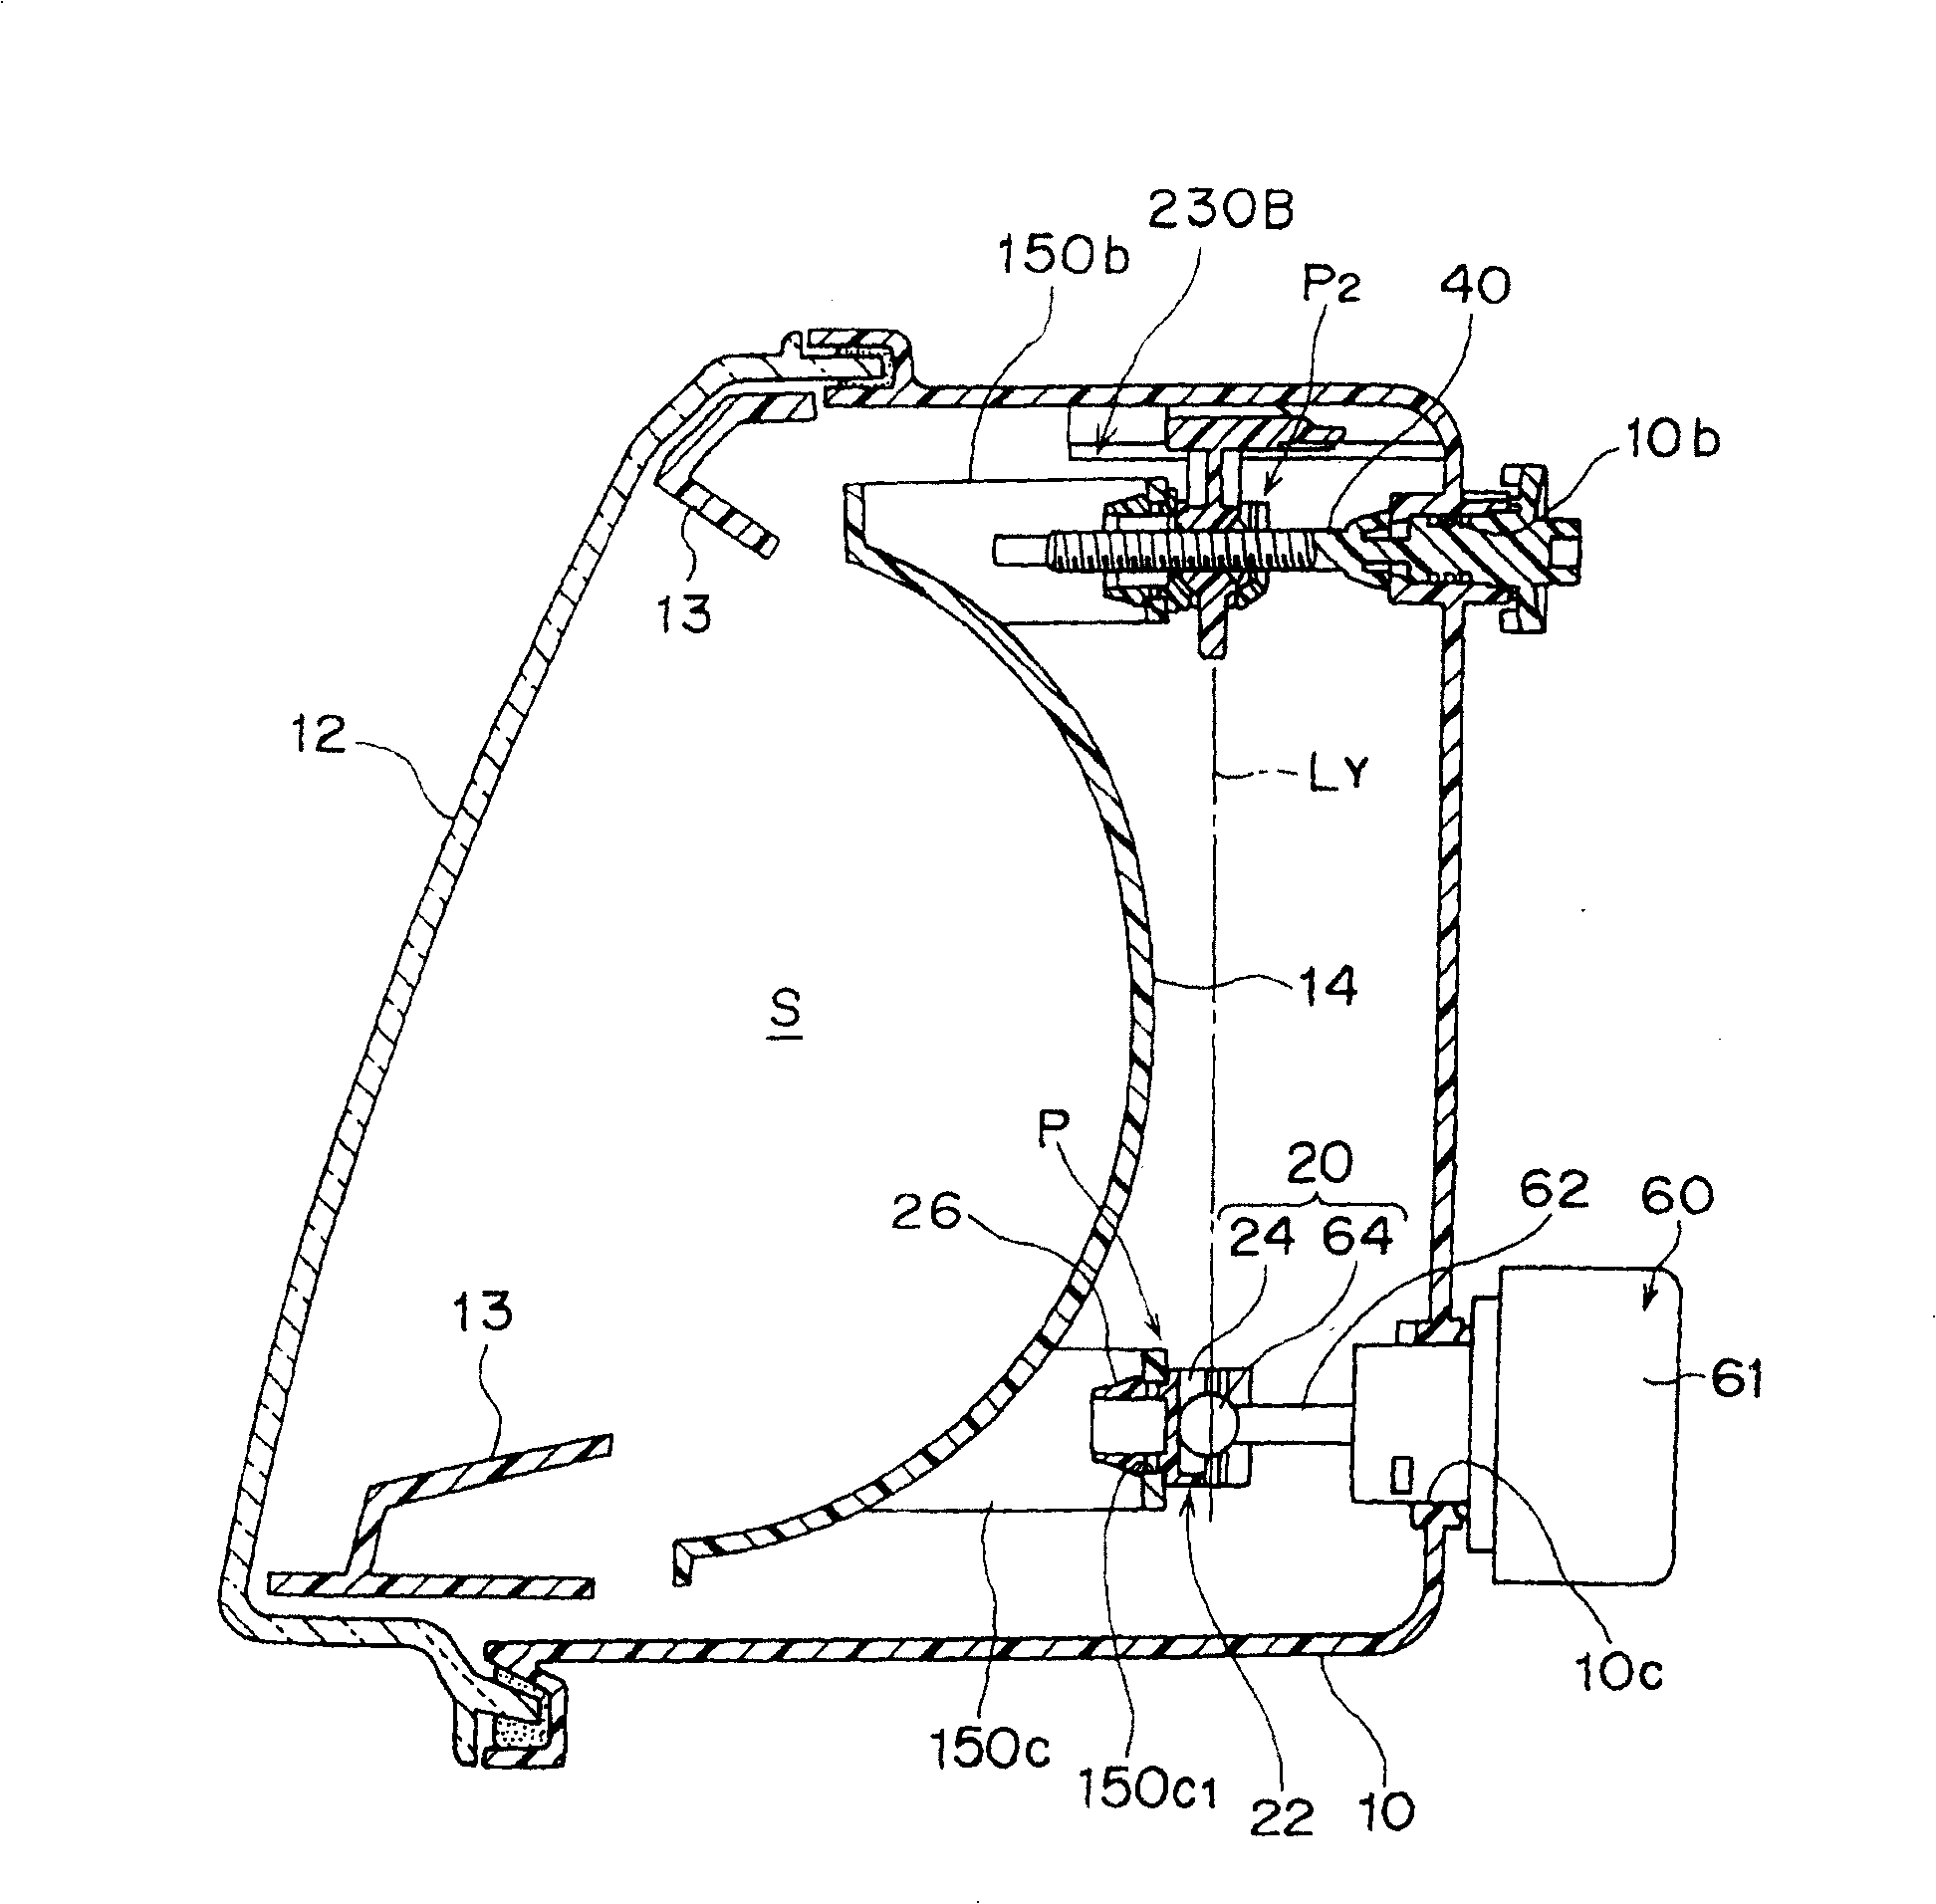 Headlight for vehicle with adjustable mirror